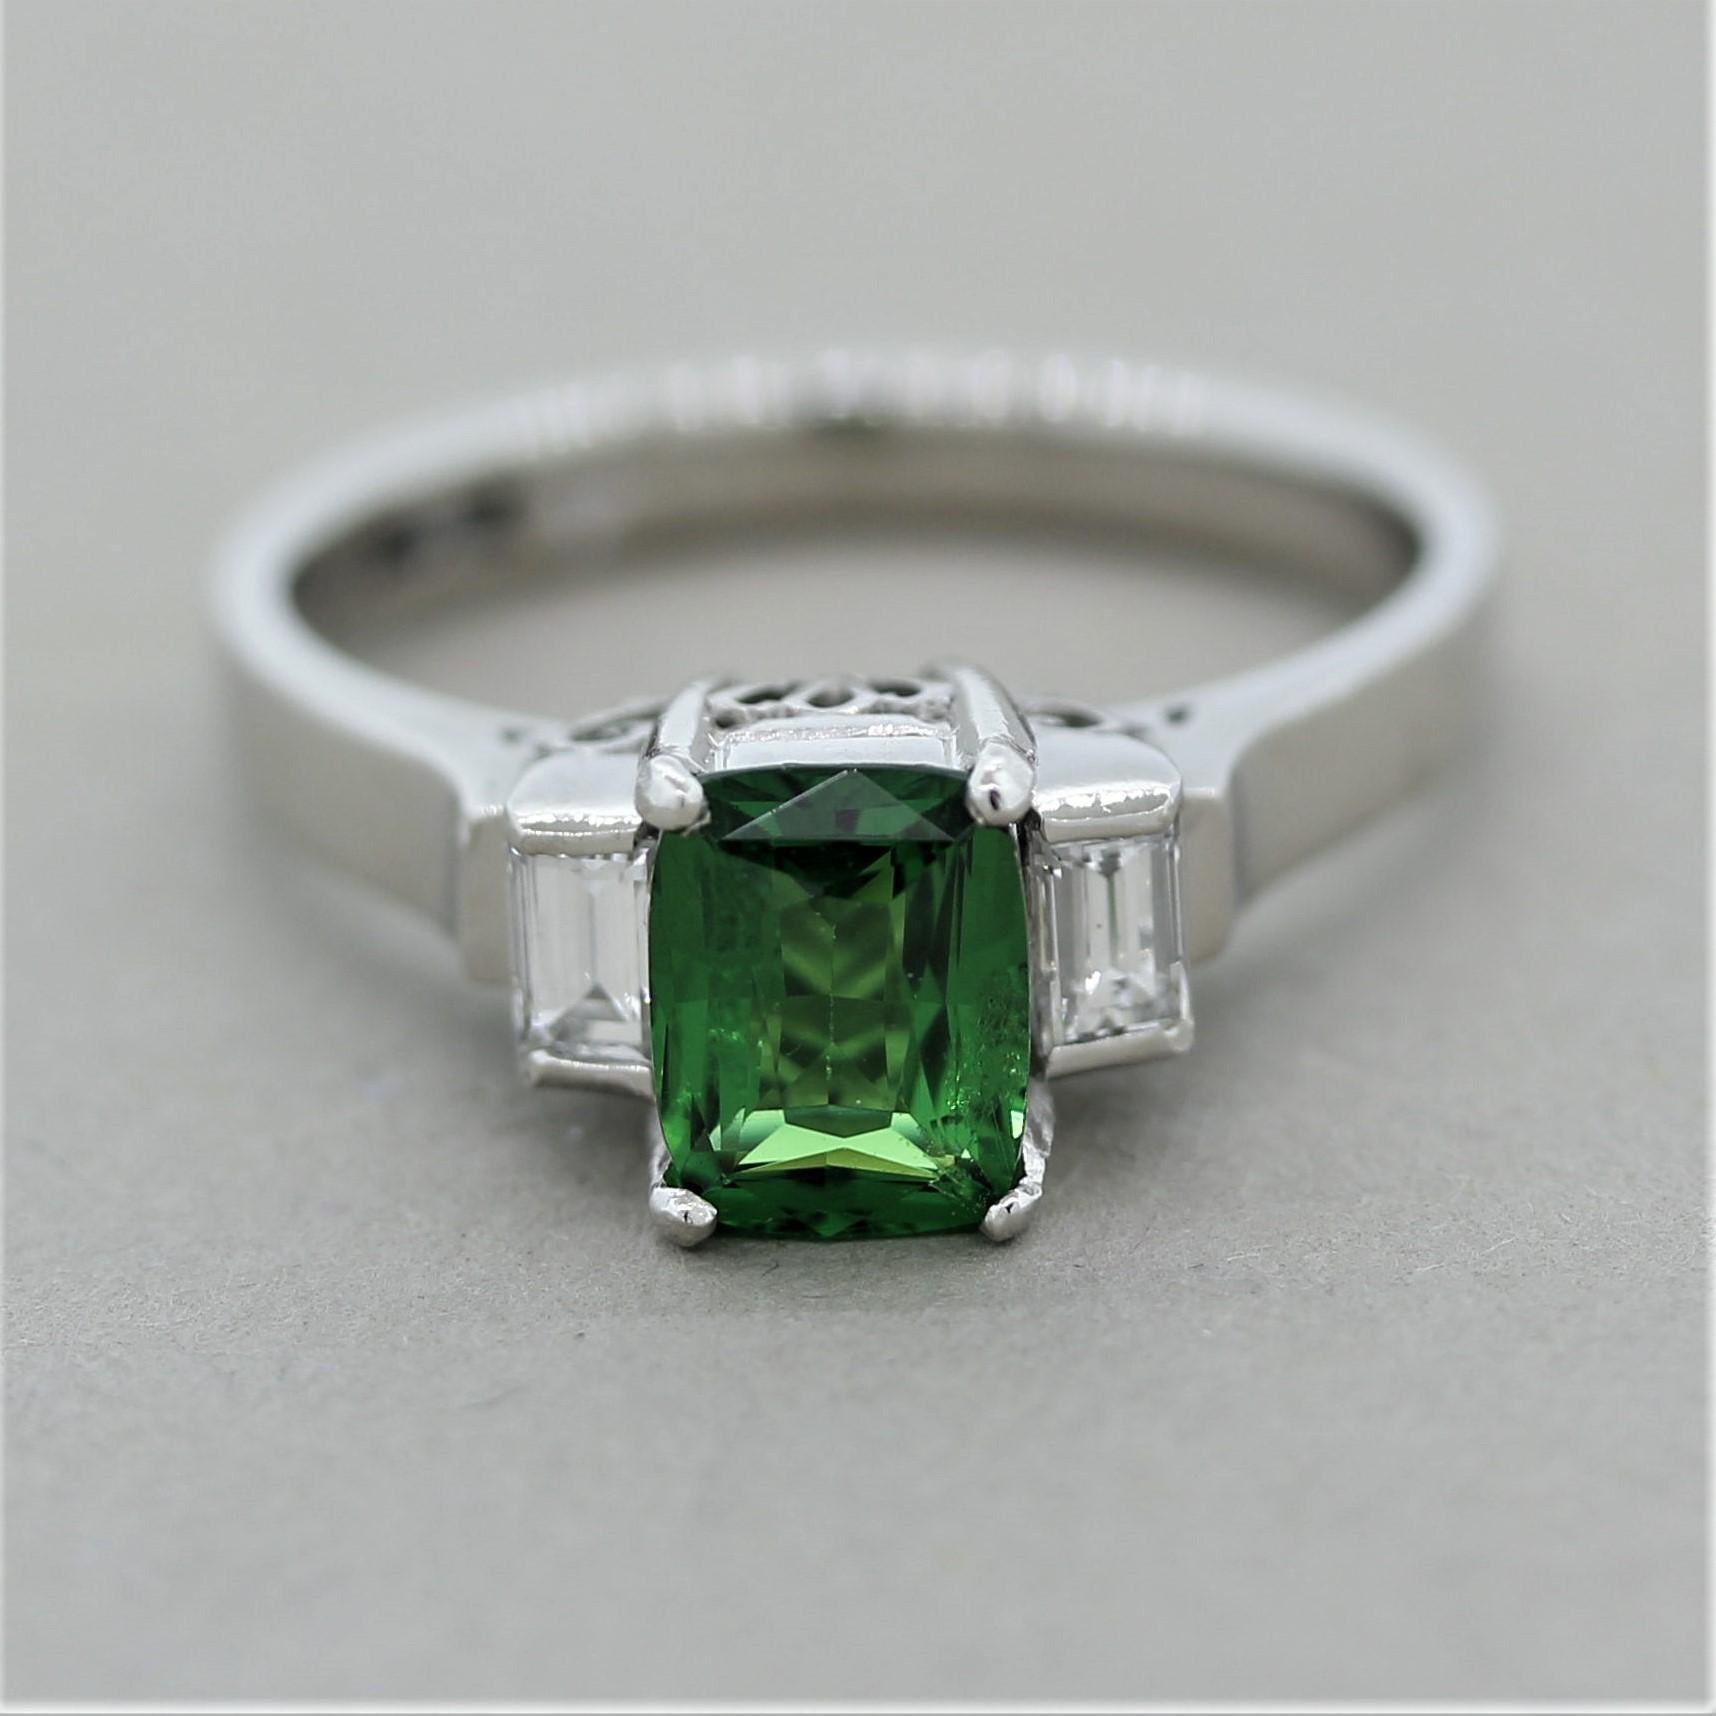 A classic 3-stone ring featuring a superb gem quality tsavorite weighing 1.10 carats. It has the ideal vivid pure green color with excellent brightness and brilliance. It is accented by 2 baguette cut diamonds set on the sides of the tsavorite and